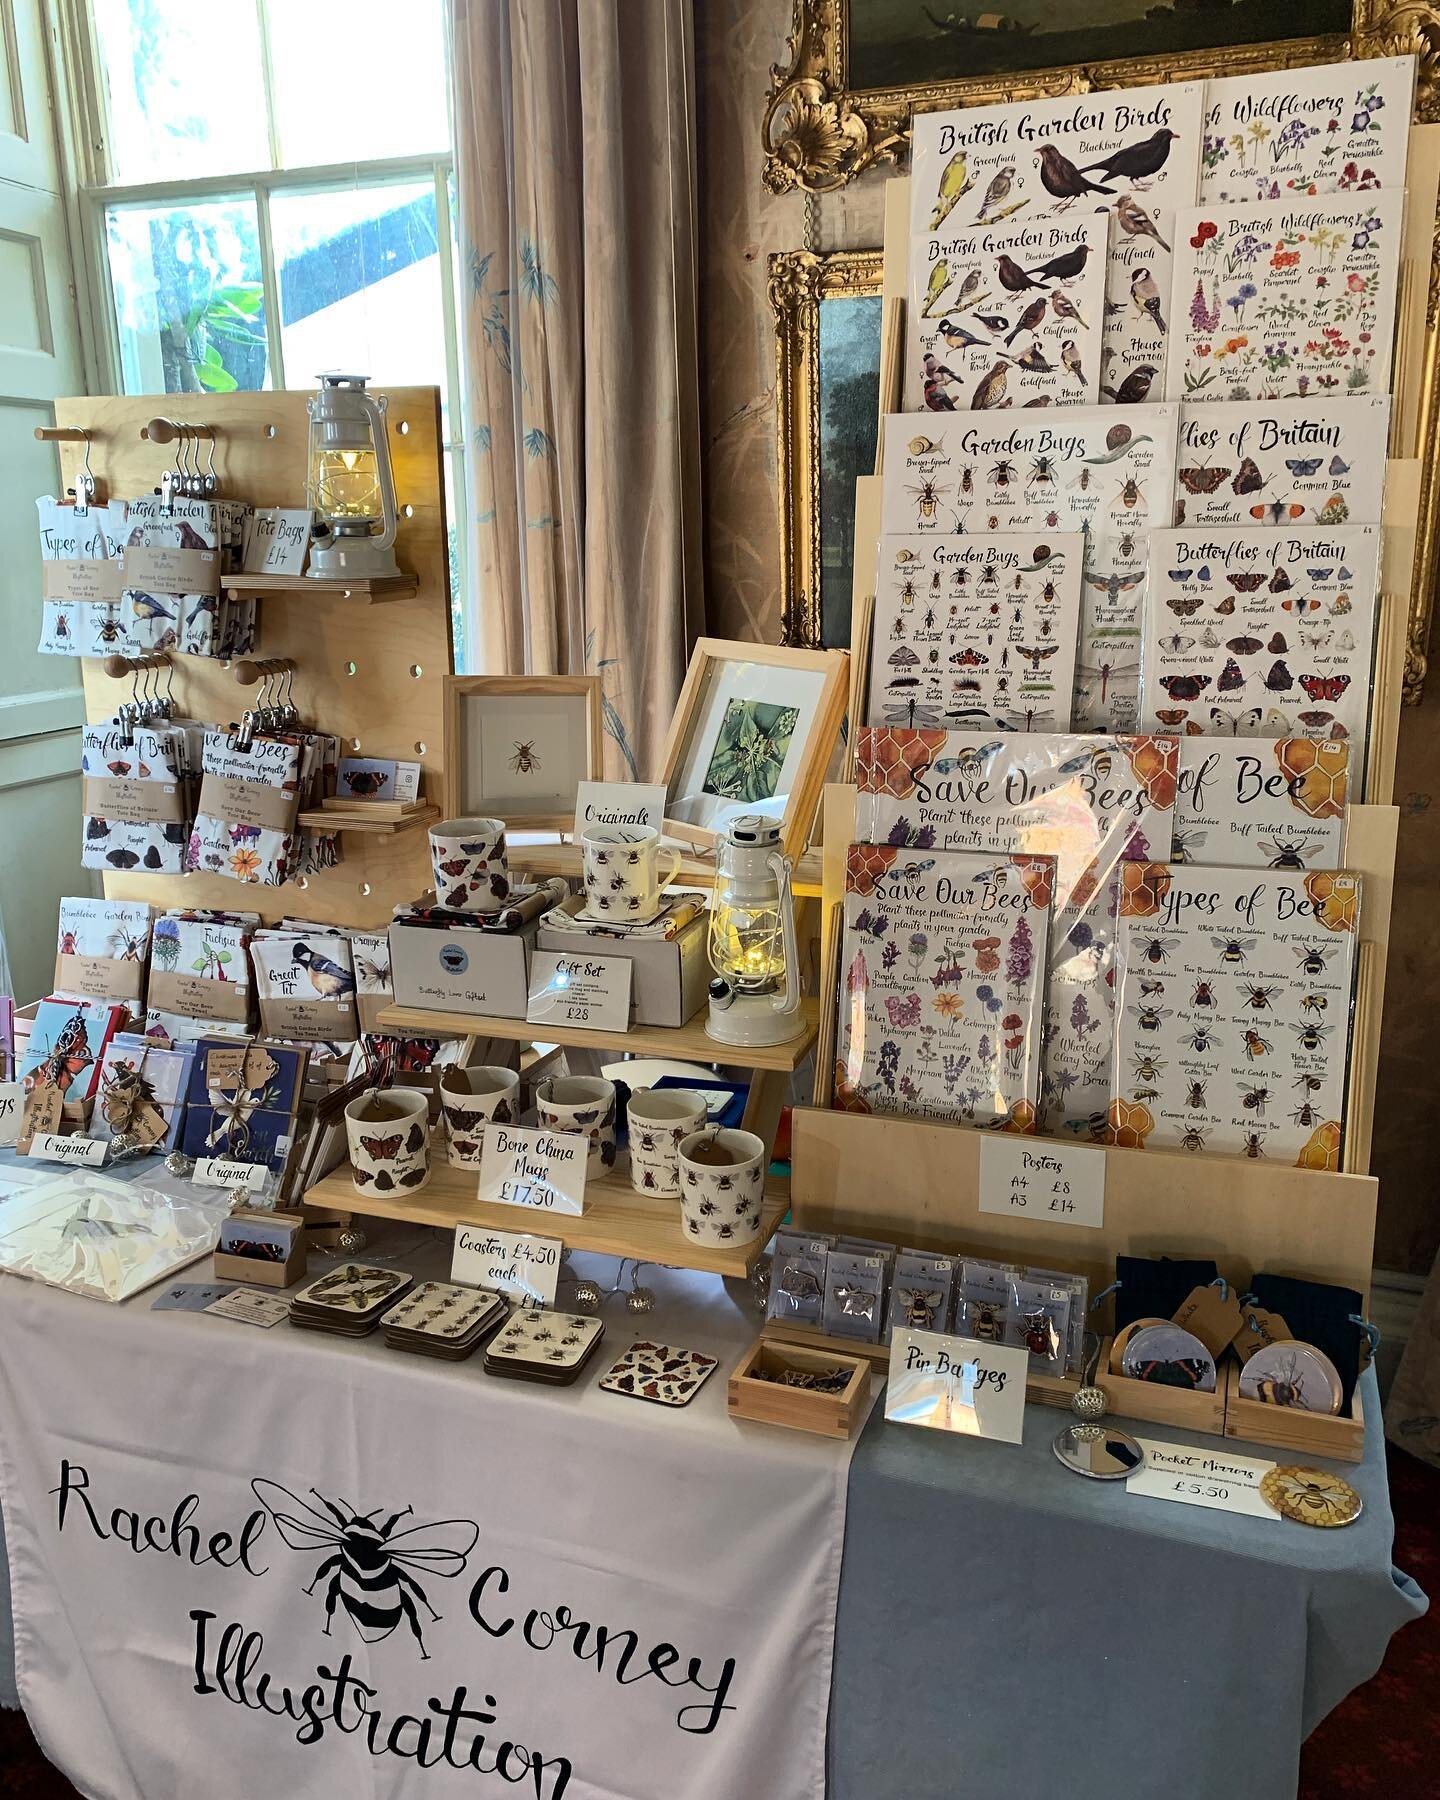 All set up for the Artisan Christmas Market at @pencarrowhouse today from 10am-4pm. It&rsquo;s a lovely sunny start to the day, hopefully it will continue! ☀️☀️